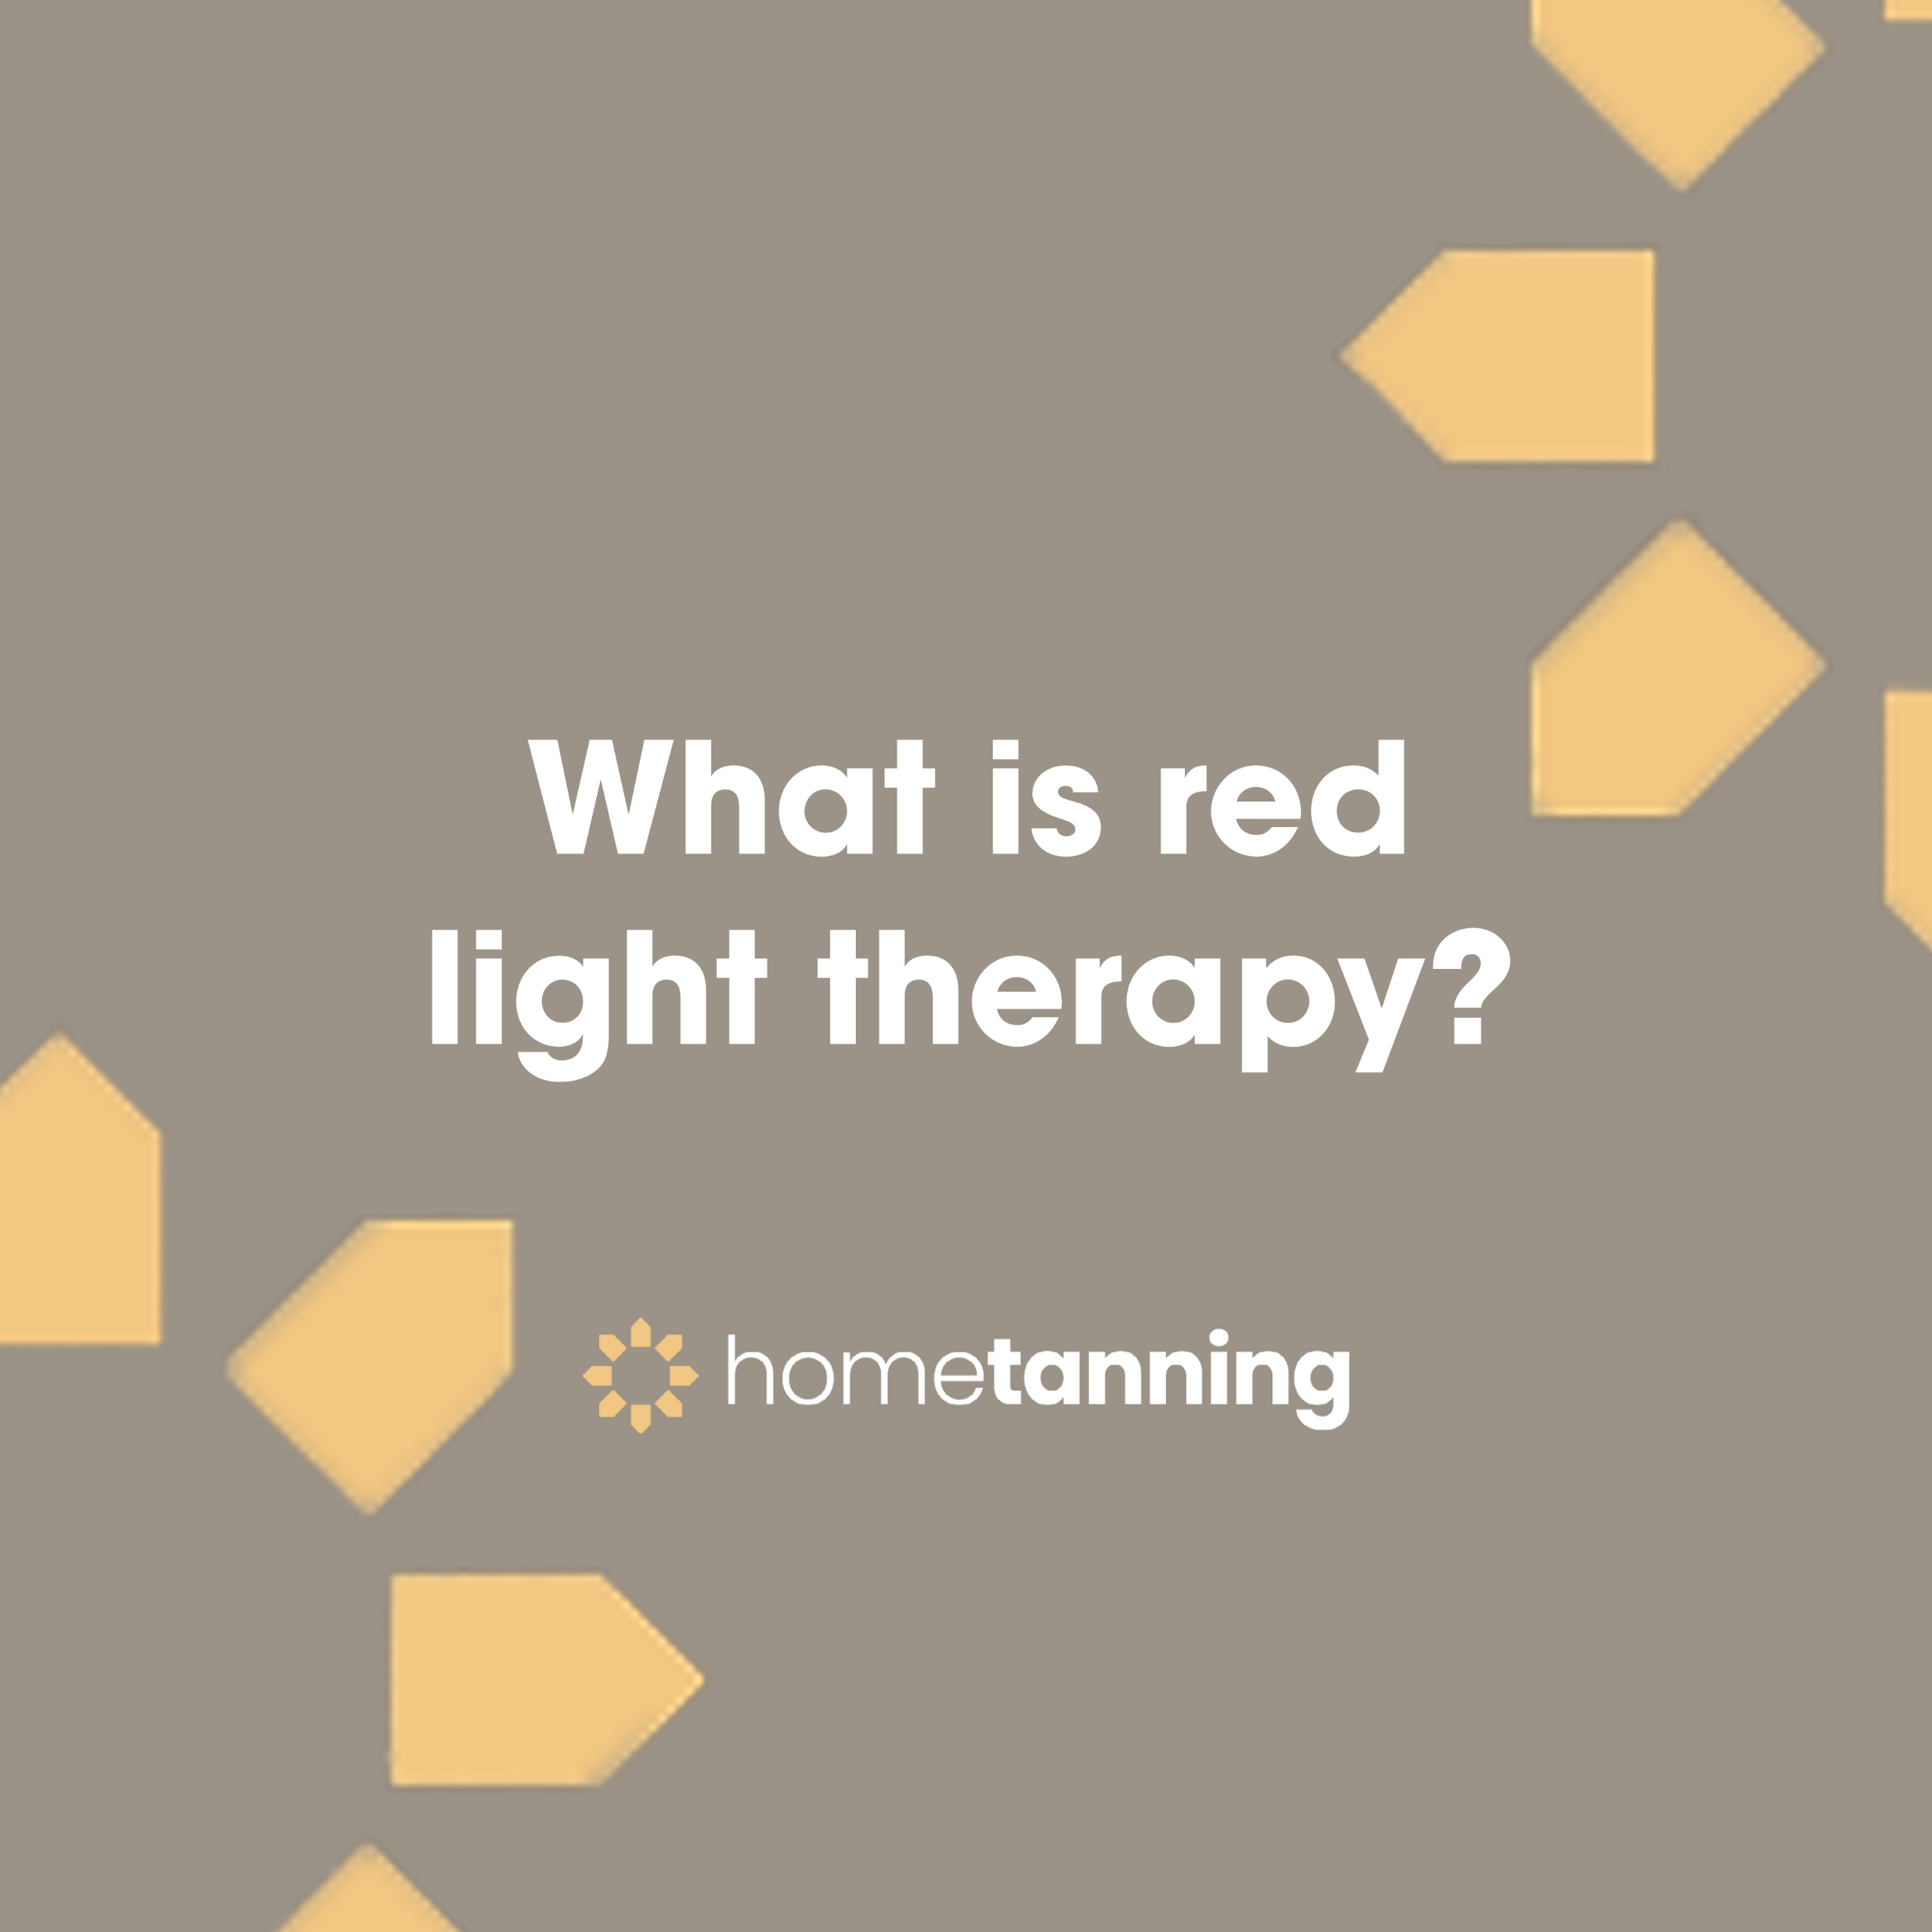 red light therapy home tanning sunbed